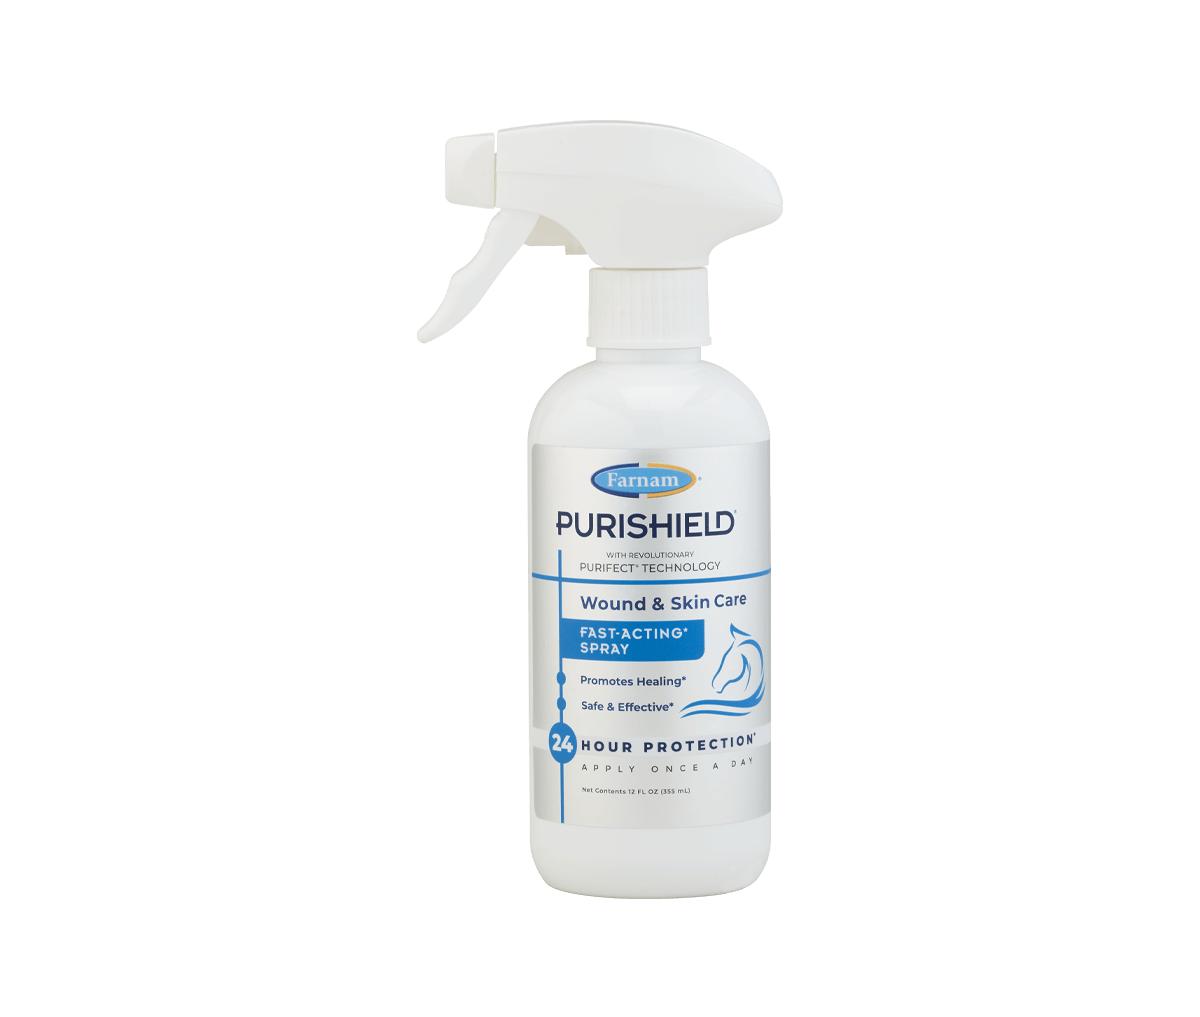 PuriShield-Fast-Acting-Spray_12oz_Product-Image png